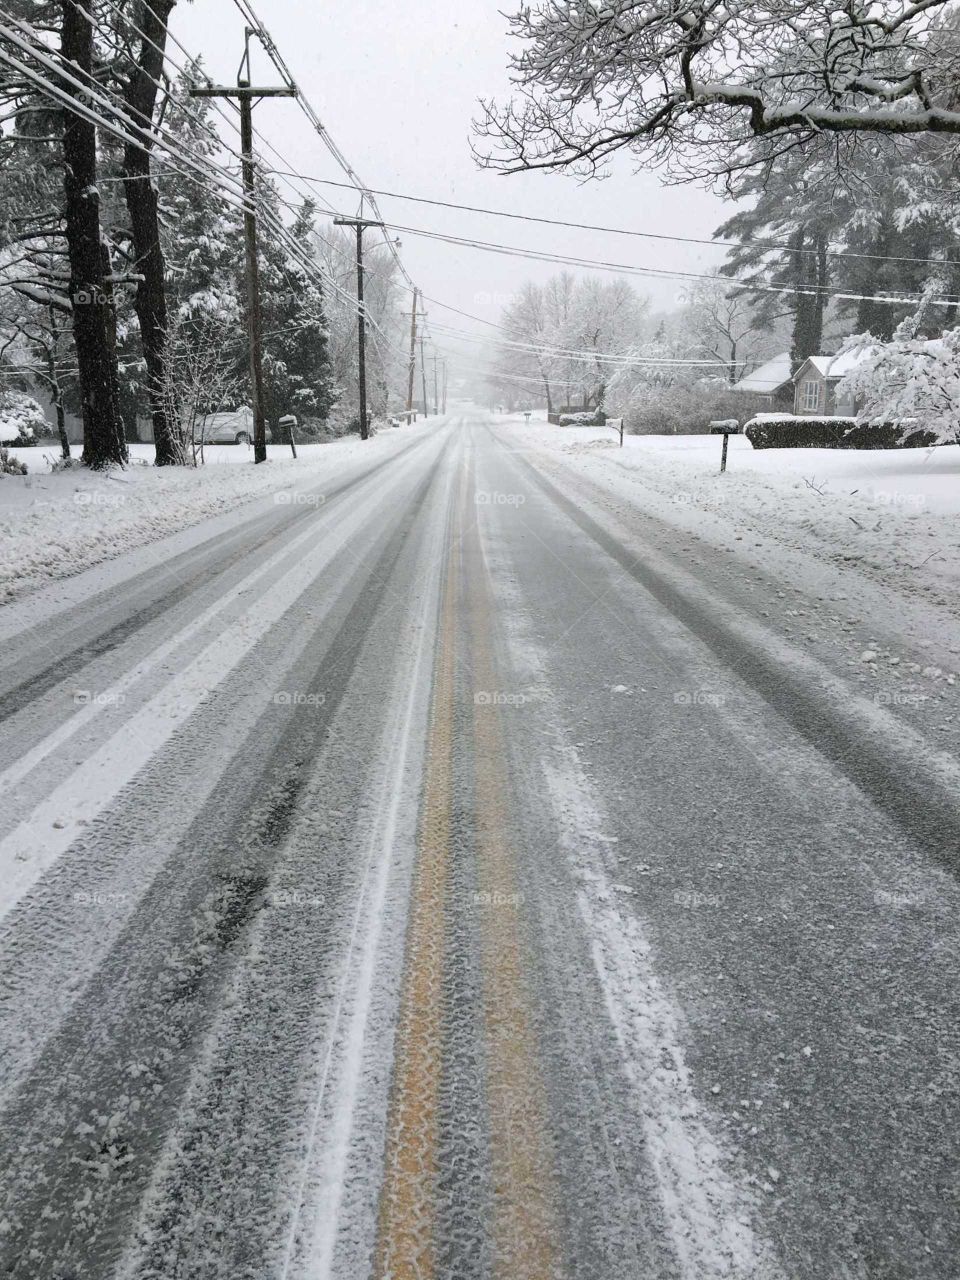 Snow covered rural road, straight road, no cars, double yellow lines visible through icy snow. No people are out shoveling during snowstorm. Winter weather, snow, pic in middle of the road. Almost monochromatic B & W pic!  Snow covered street.